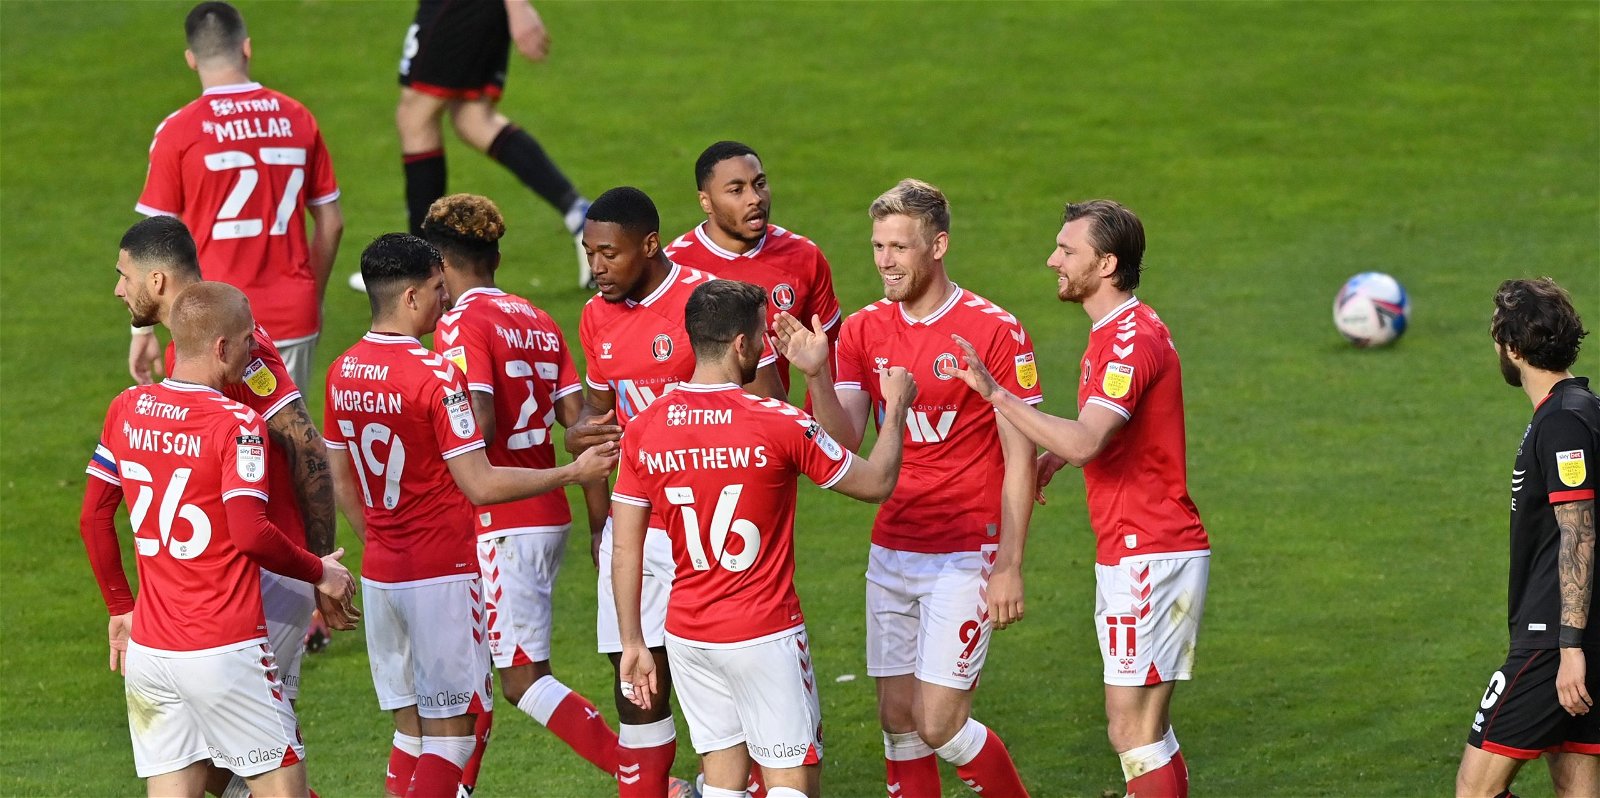 , Charlton Athletic squad analysis: Who else are the Addicks going to sign?